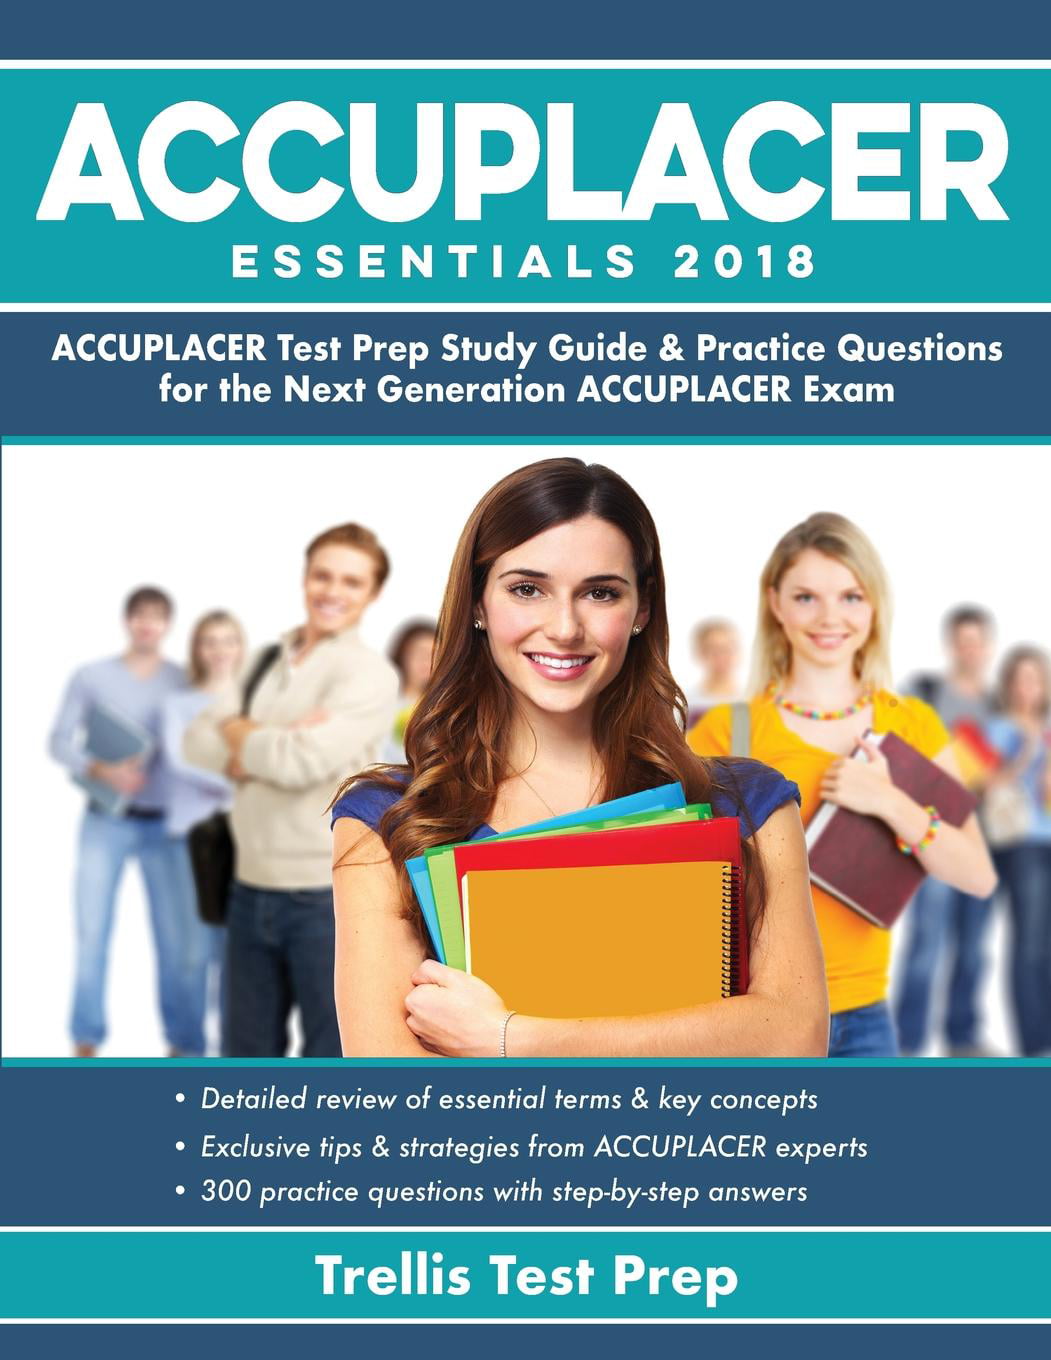 accuplacer-essentials-2018-accuplacer-test-prep-study-guide-practice-questions-for-the-next